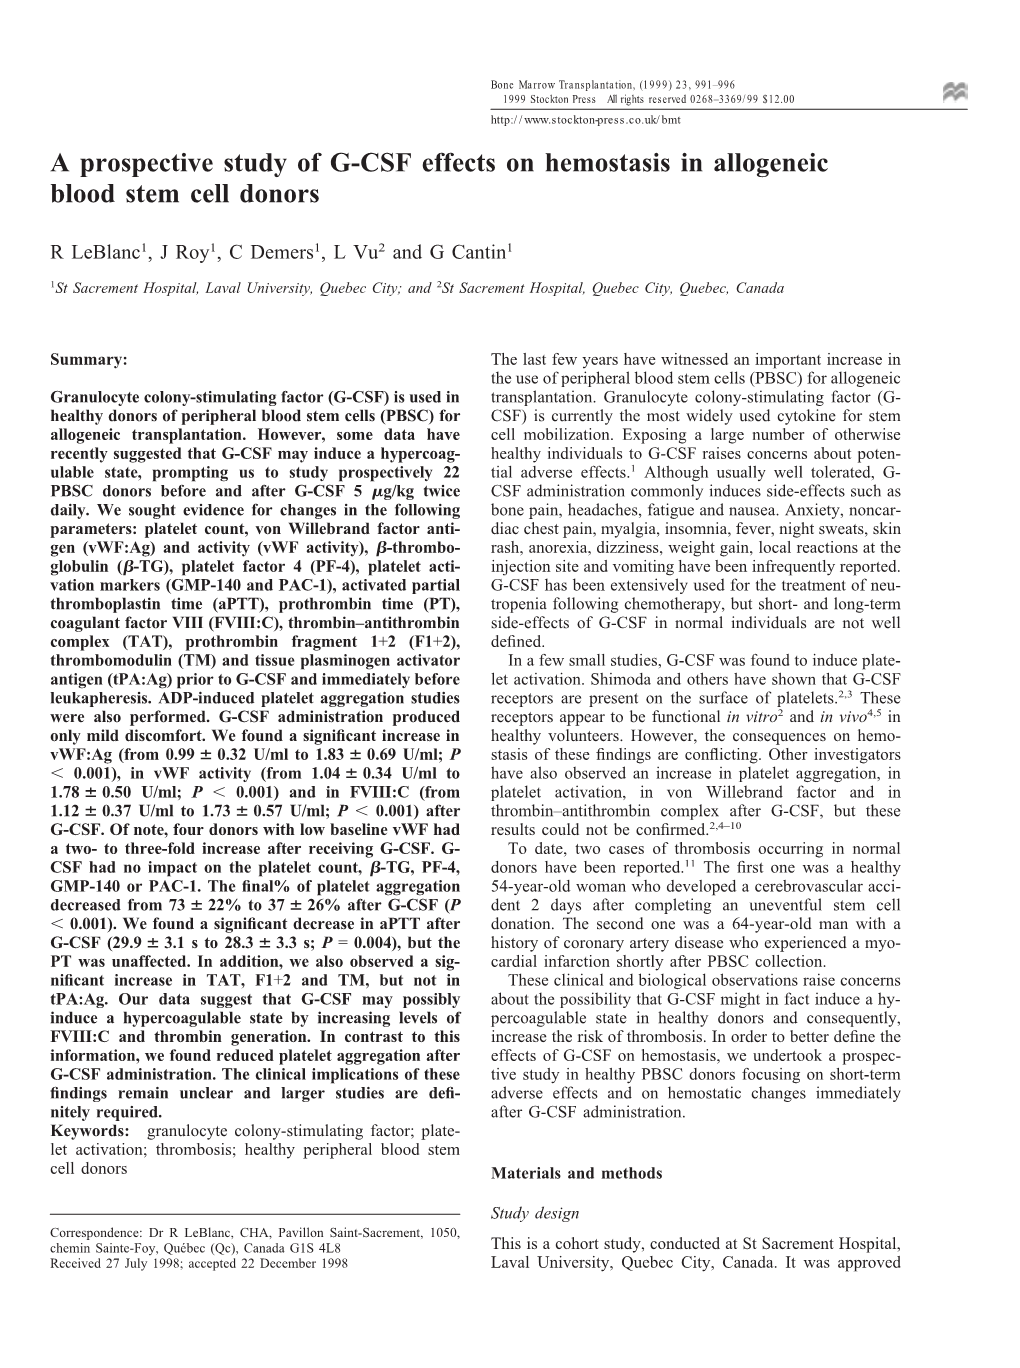 A Prospective Study of G-CSF Effects on Hemostasis in Allogeneic Blood Stem Cell Donors